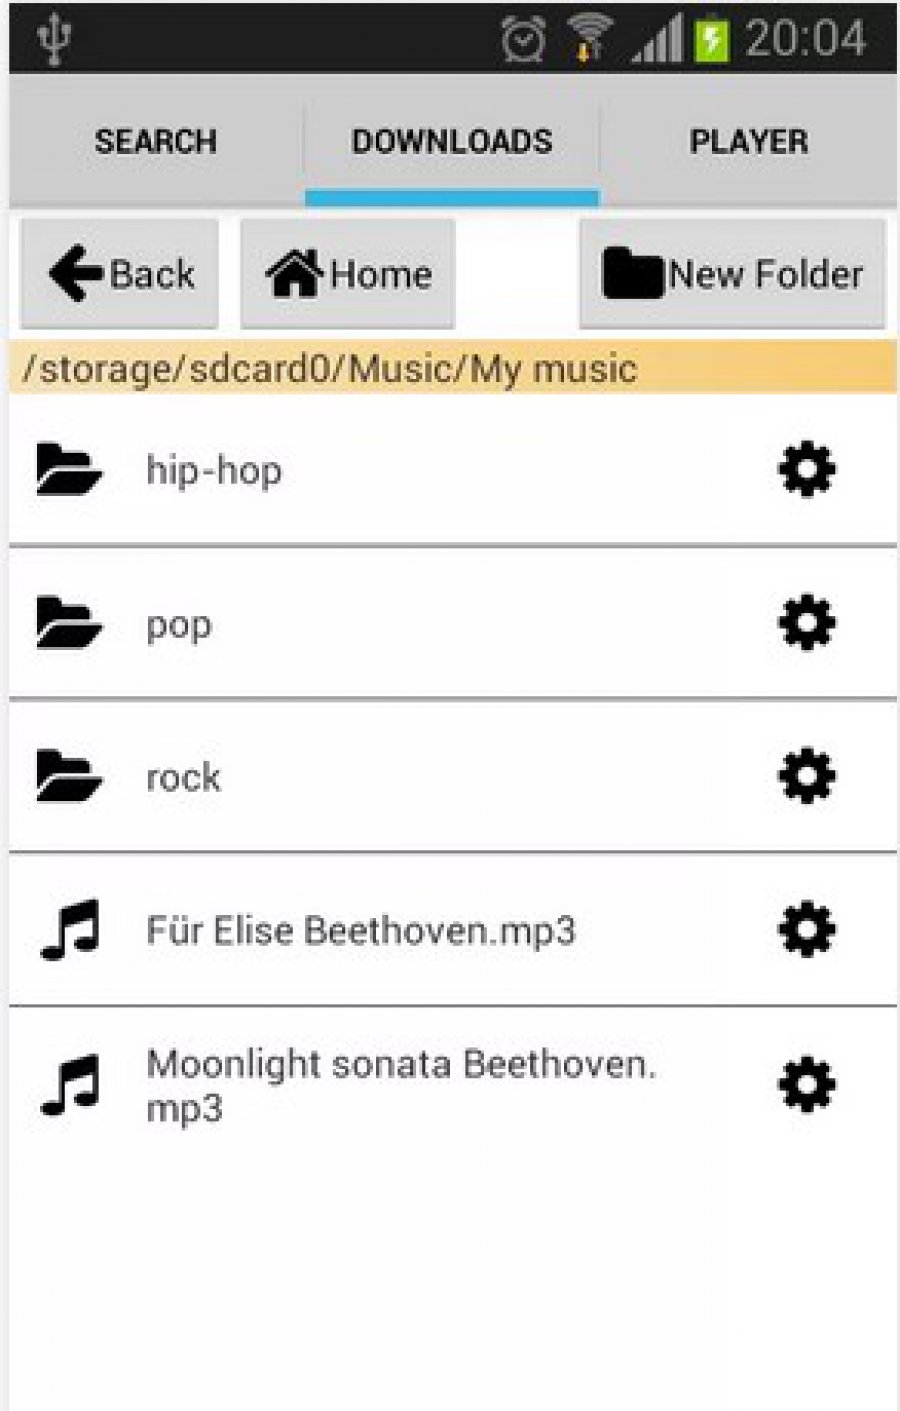 Flexispy app for android free download latest version